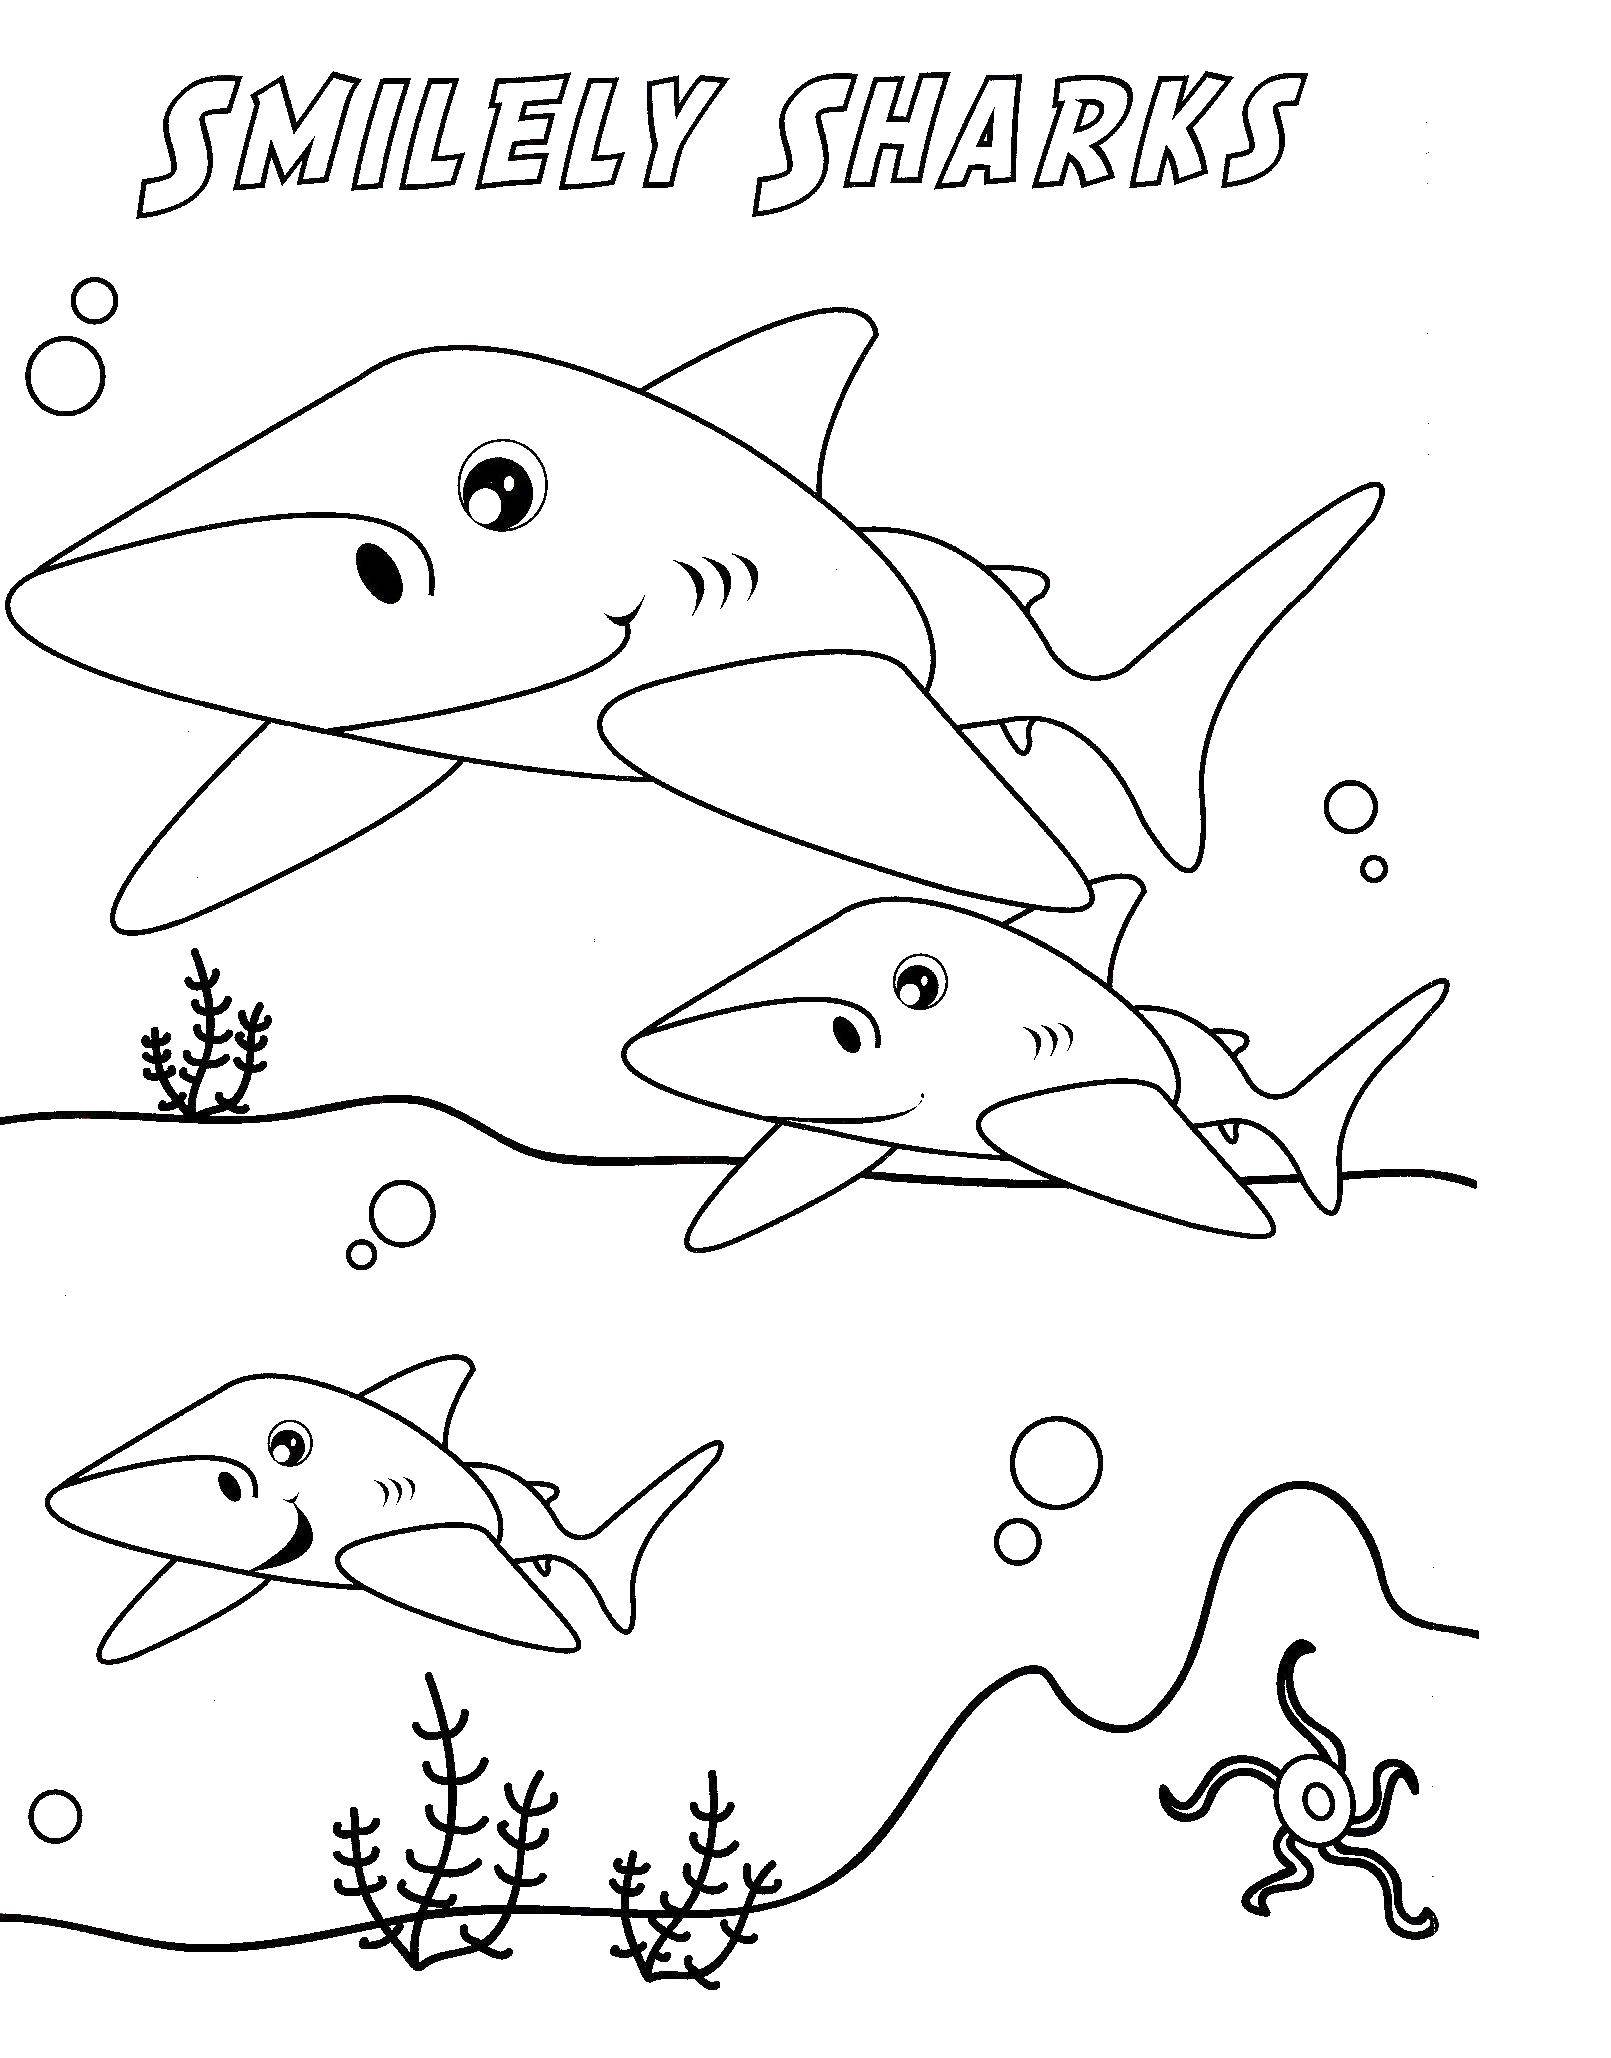 Coloring A hundred sharks. Category marine. Tags:  Underwater world.